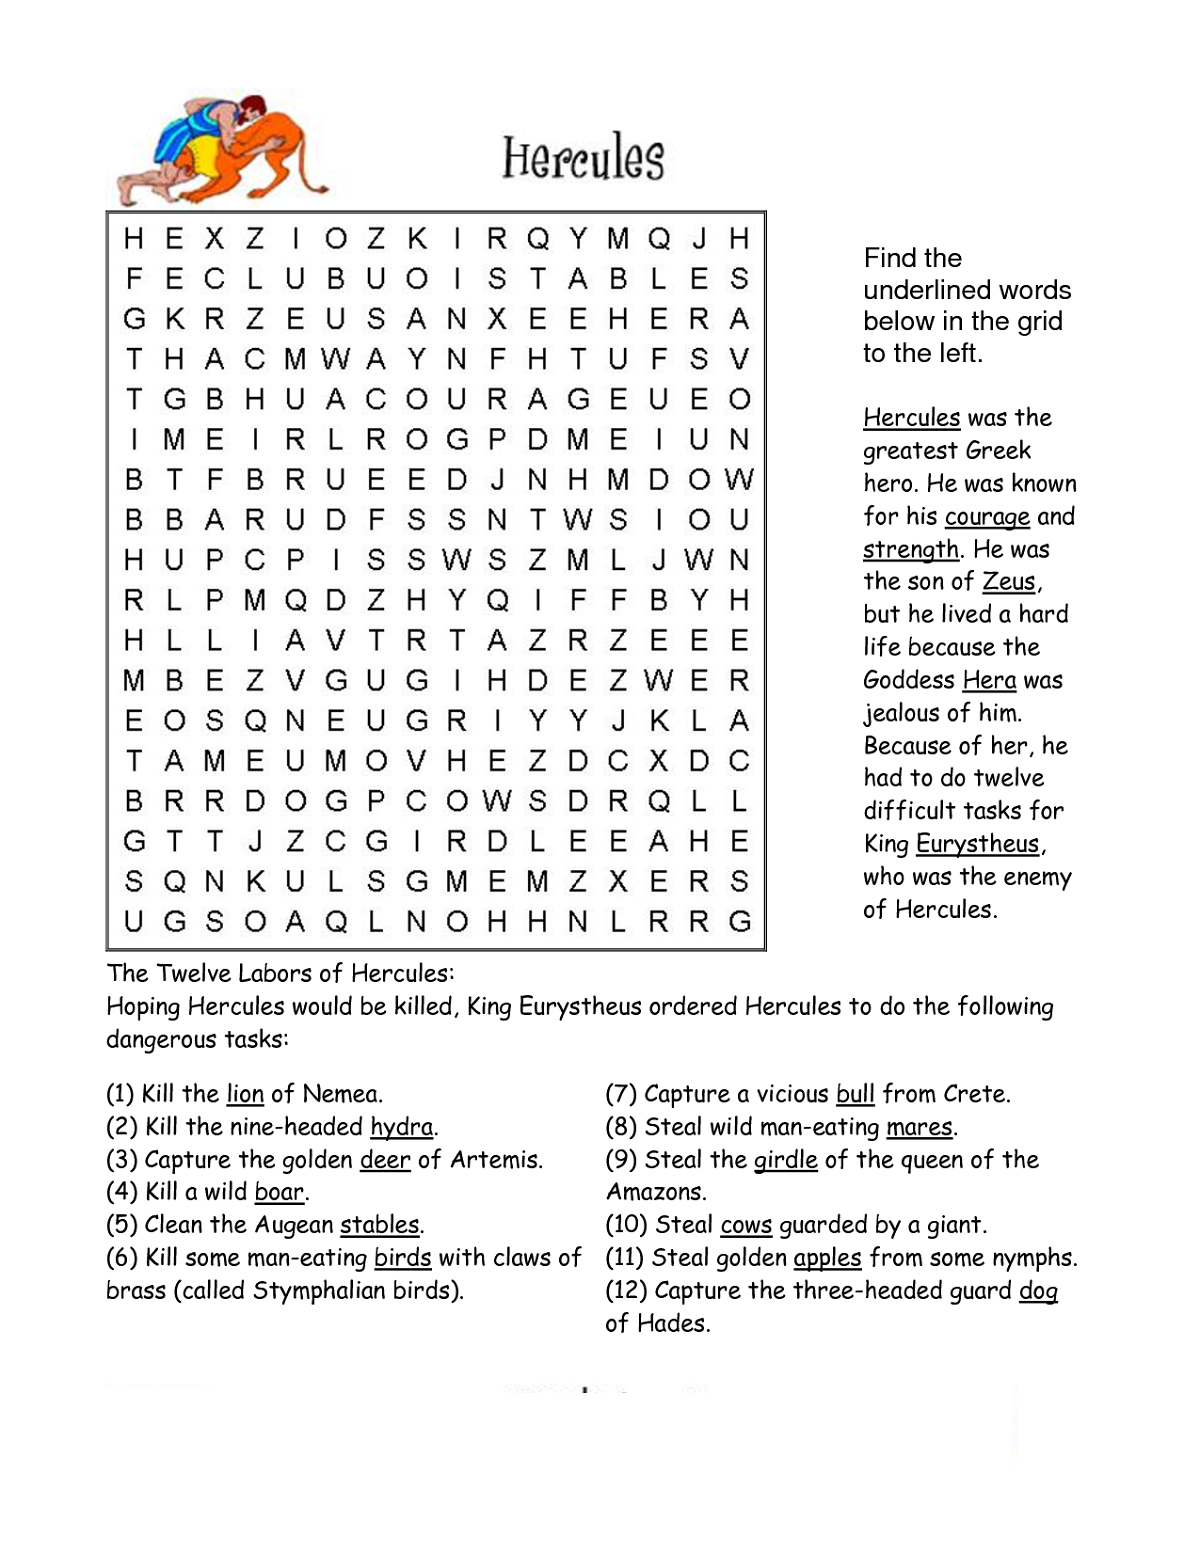 Disney Word Searches For Animation Fans | 101 Printable with regard to Disney Word Searches Printable